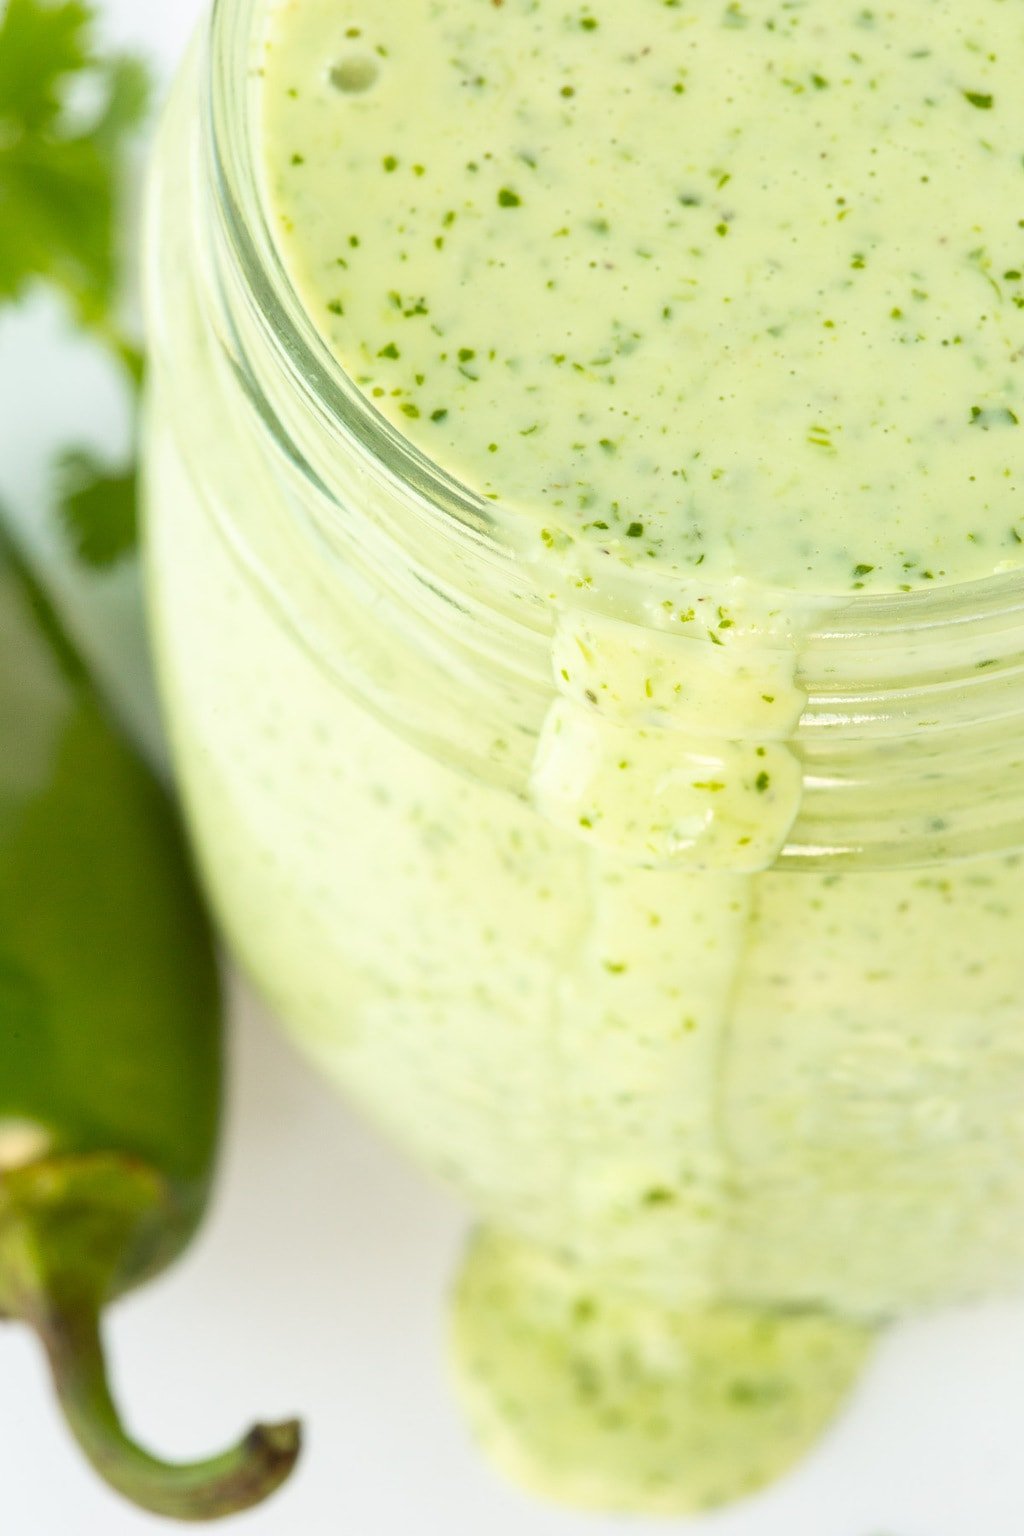 Vertical ultra closeup photo of a glass jar of Light and Spicy Southwestern Cilantro Buttermilk Dressing.